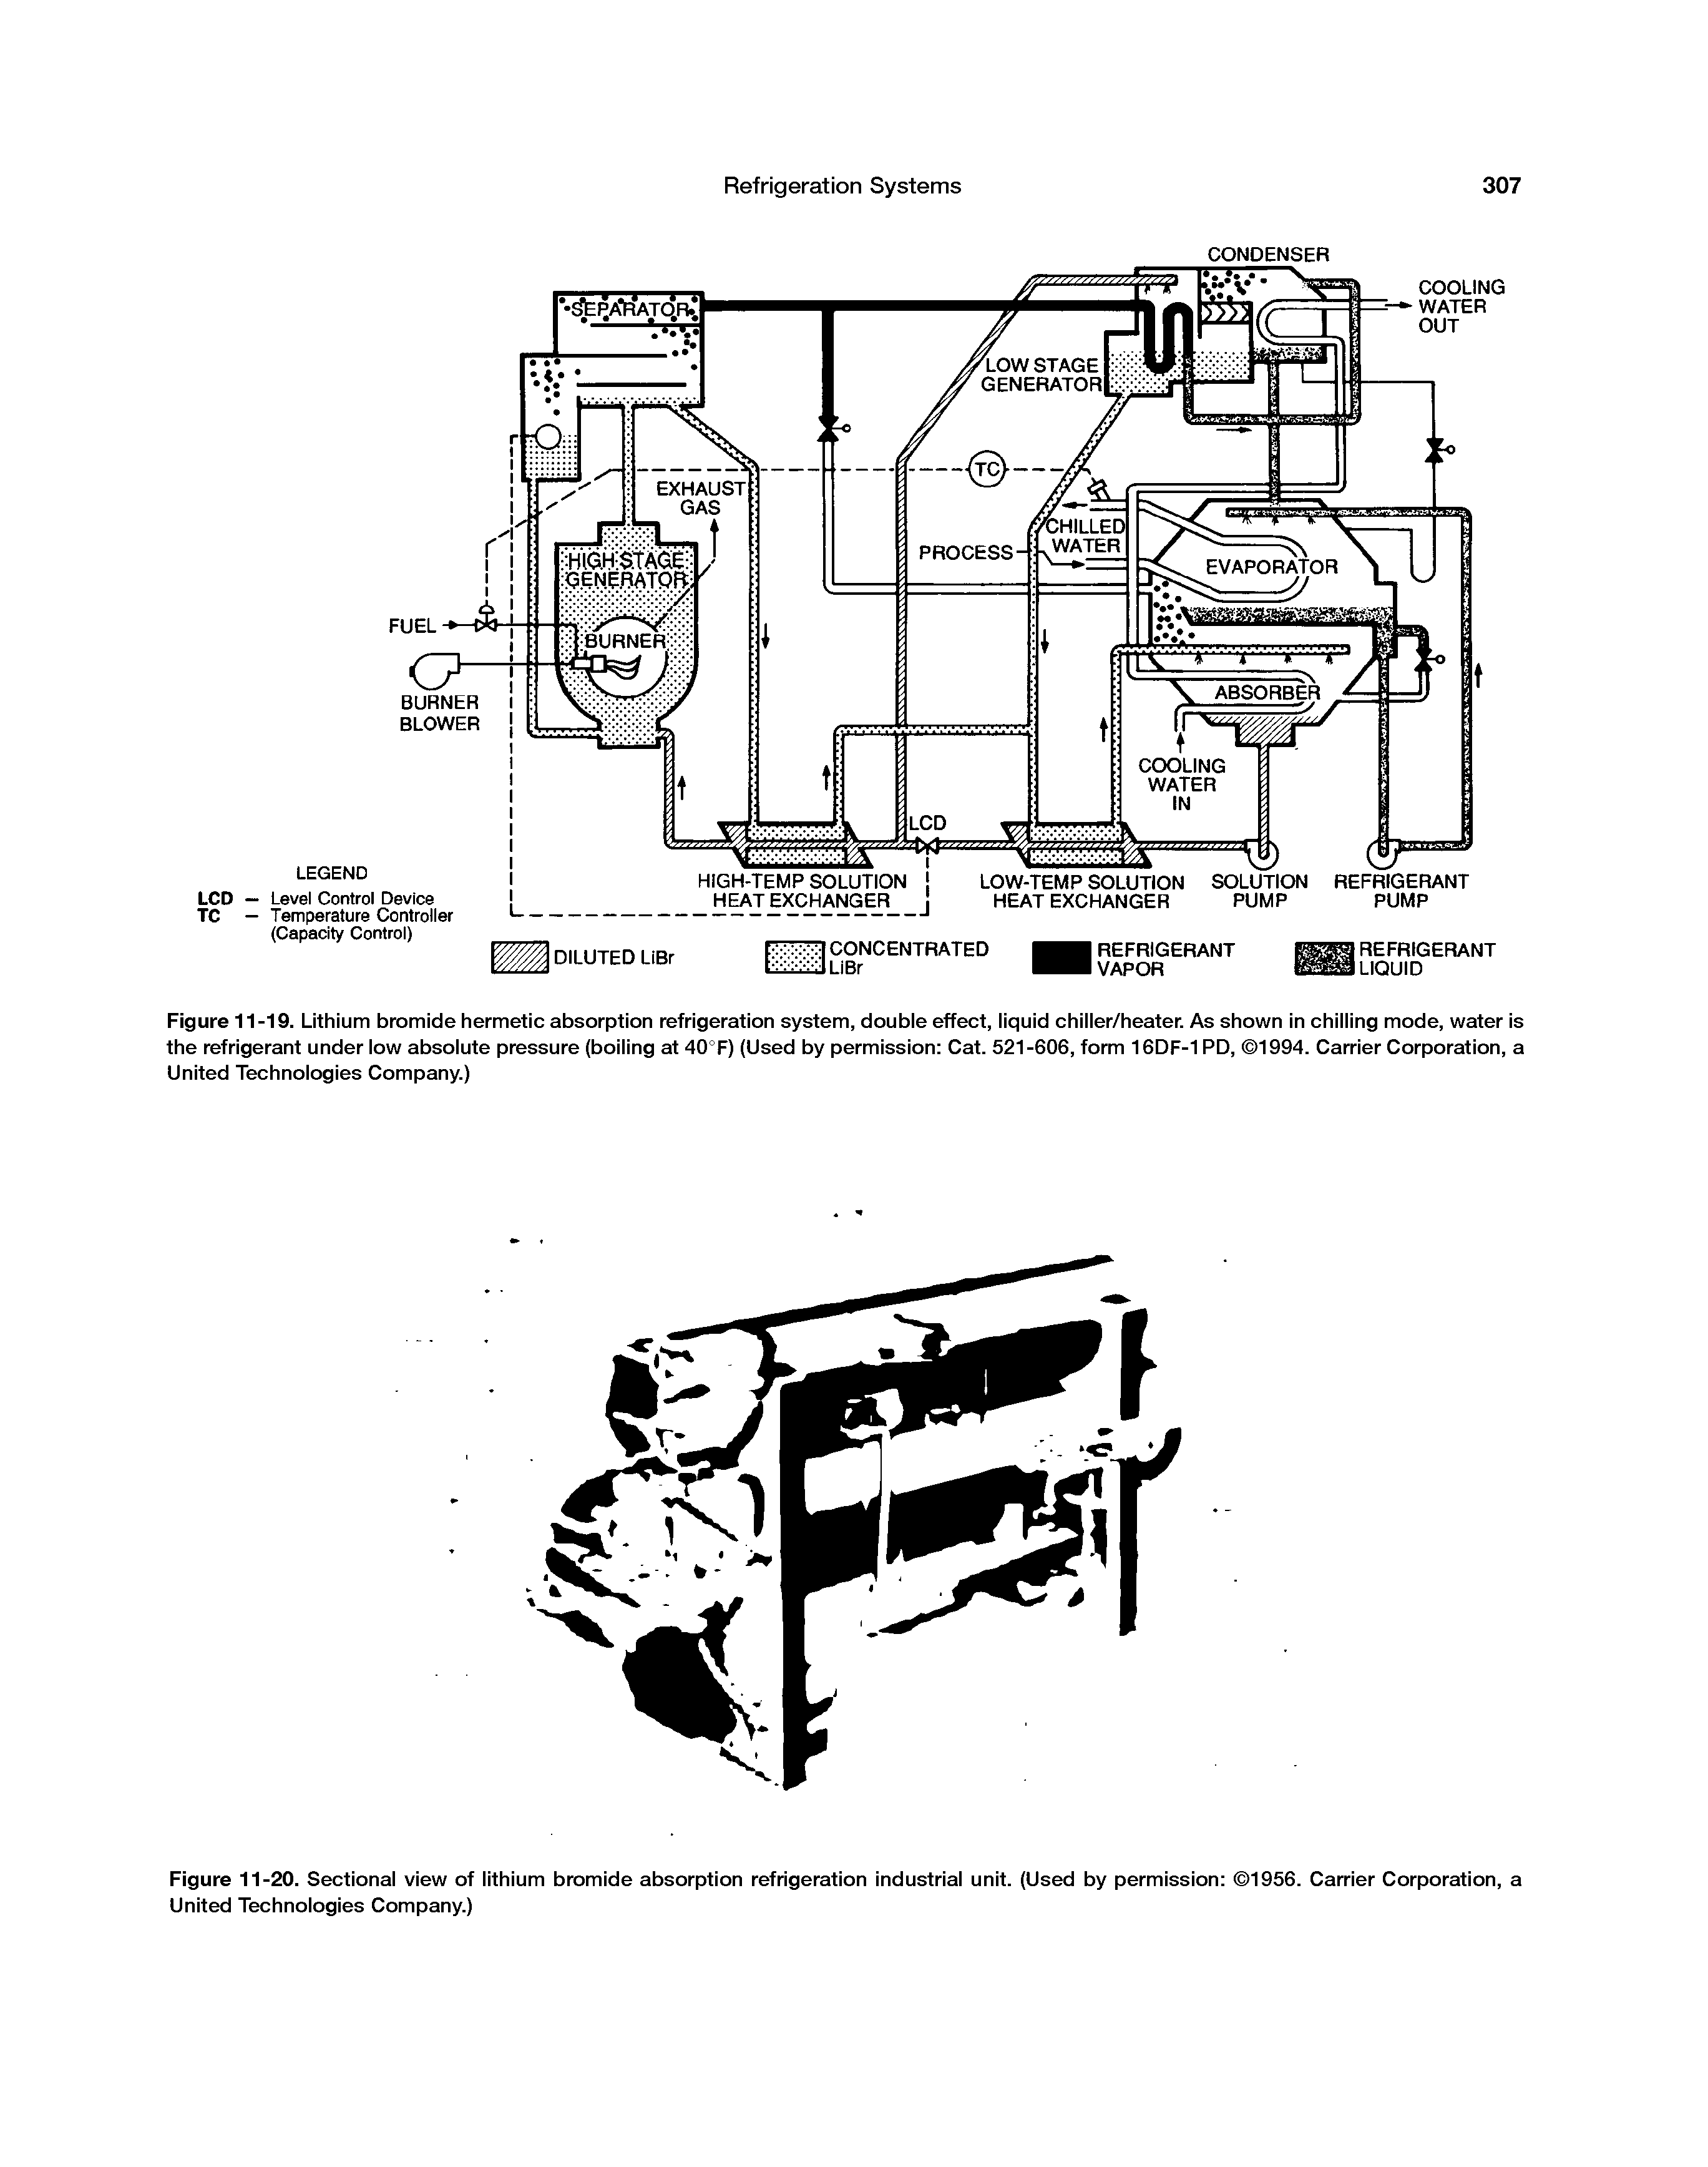 Figure 11-19. Lithium bromide hermetic absorption refrigeration system, double effect, liquid chiller/heater. As shown in chilling mode, water is the refrigerant under low absolute pressure (boiling at 40°F) (Used by permission Cat. 521-606, form 16DF-1 PD, 1994. Carrier Corporation, a United Technologies Company.)...